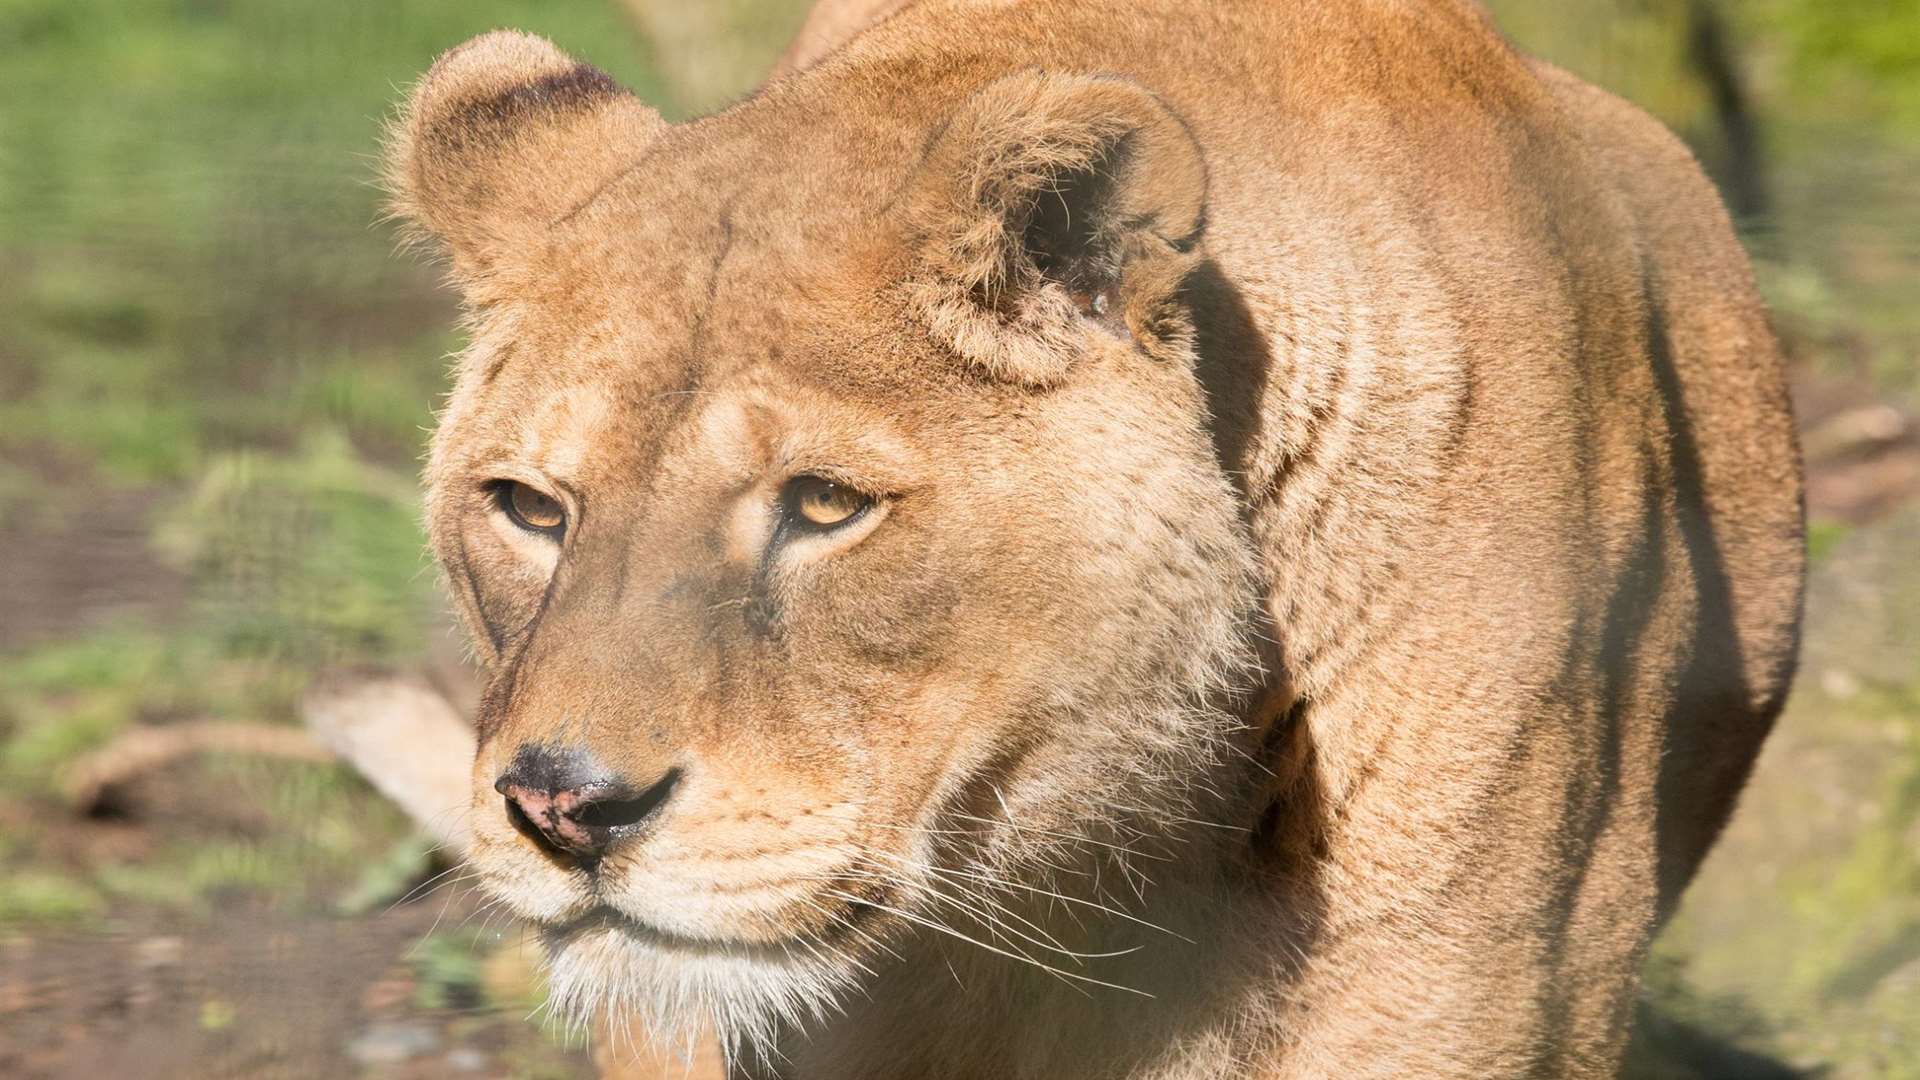 Samira the lion at Port Lympne who has died. Picture: Port Lympne Reserve